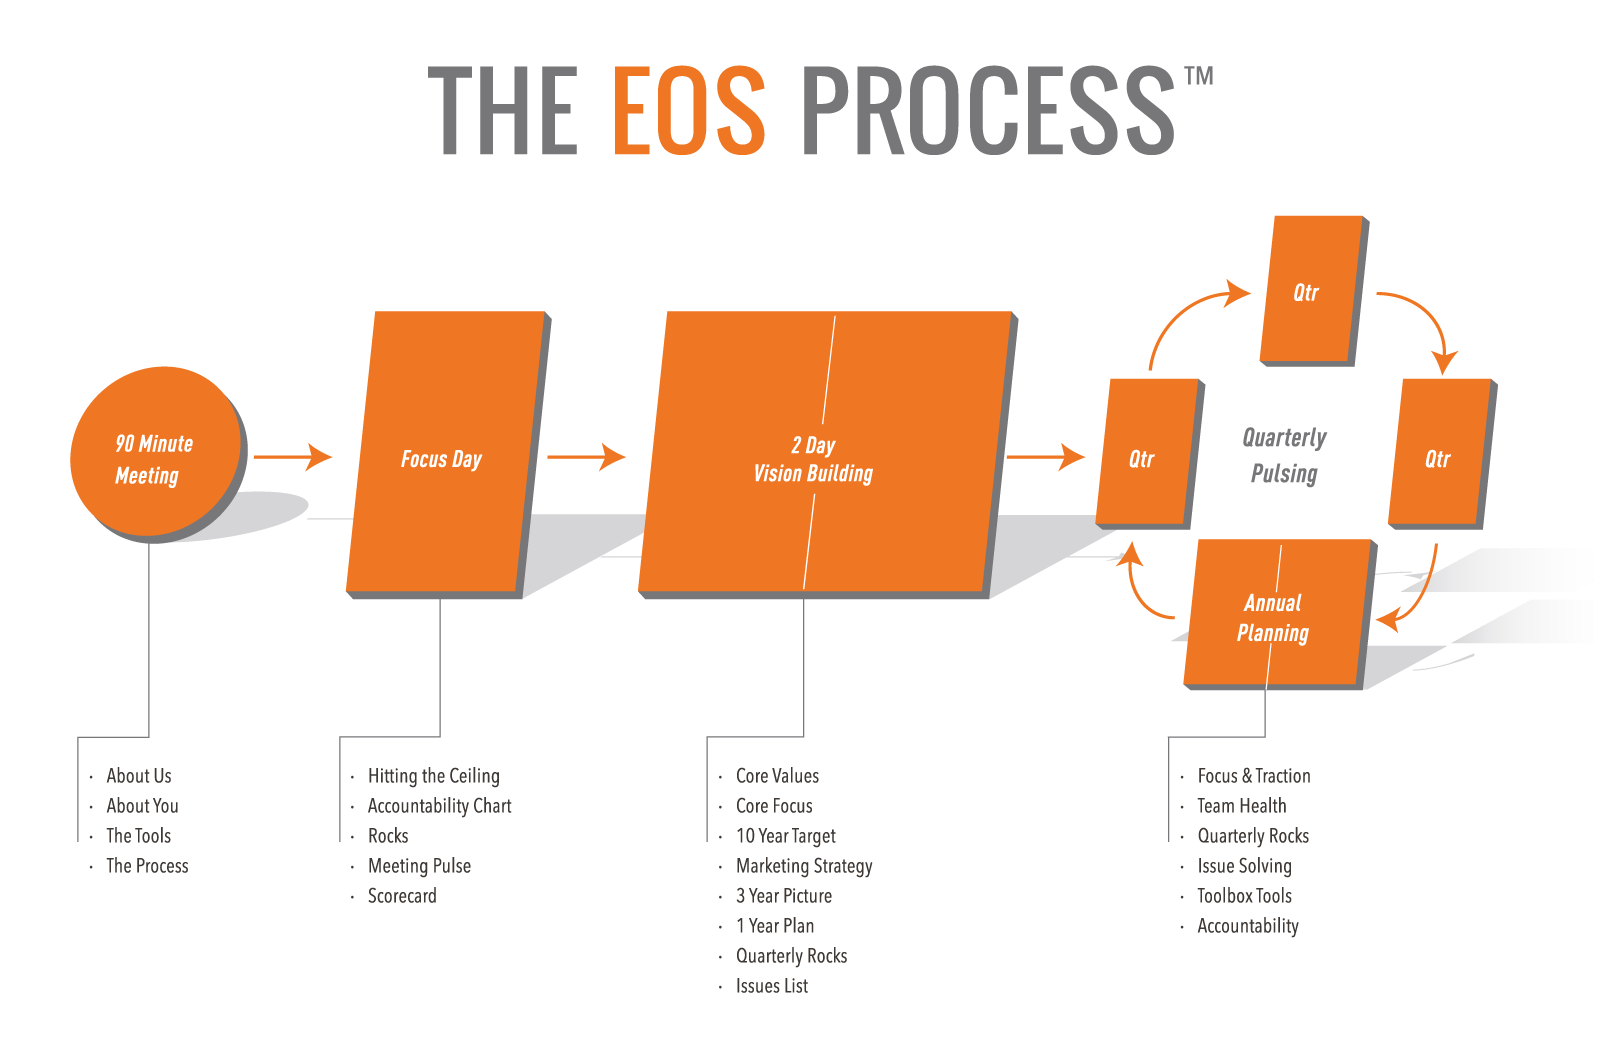 An image showing the EOS Process that 2Elate use